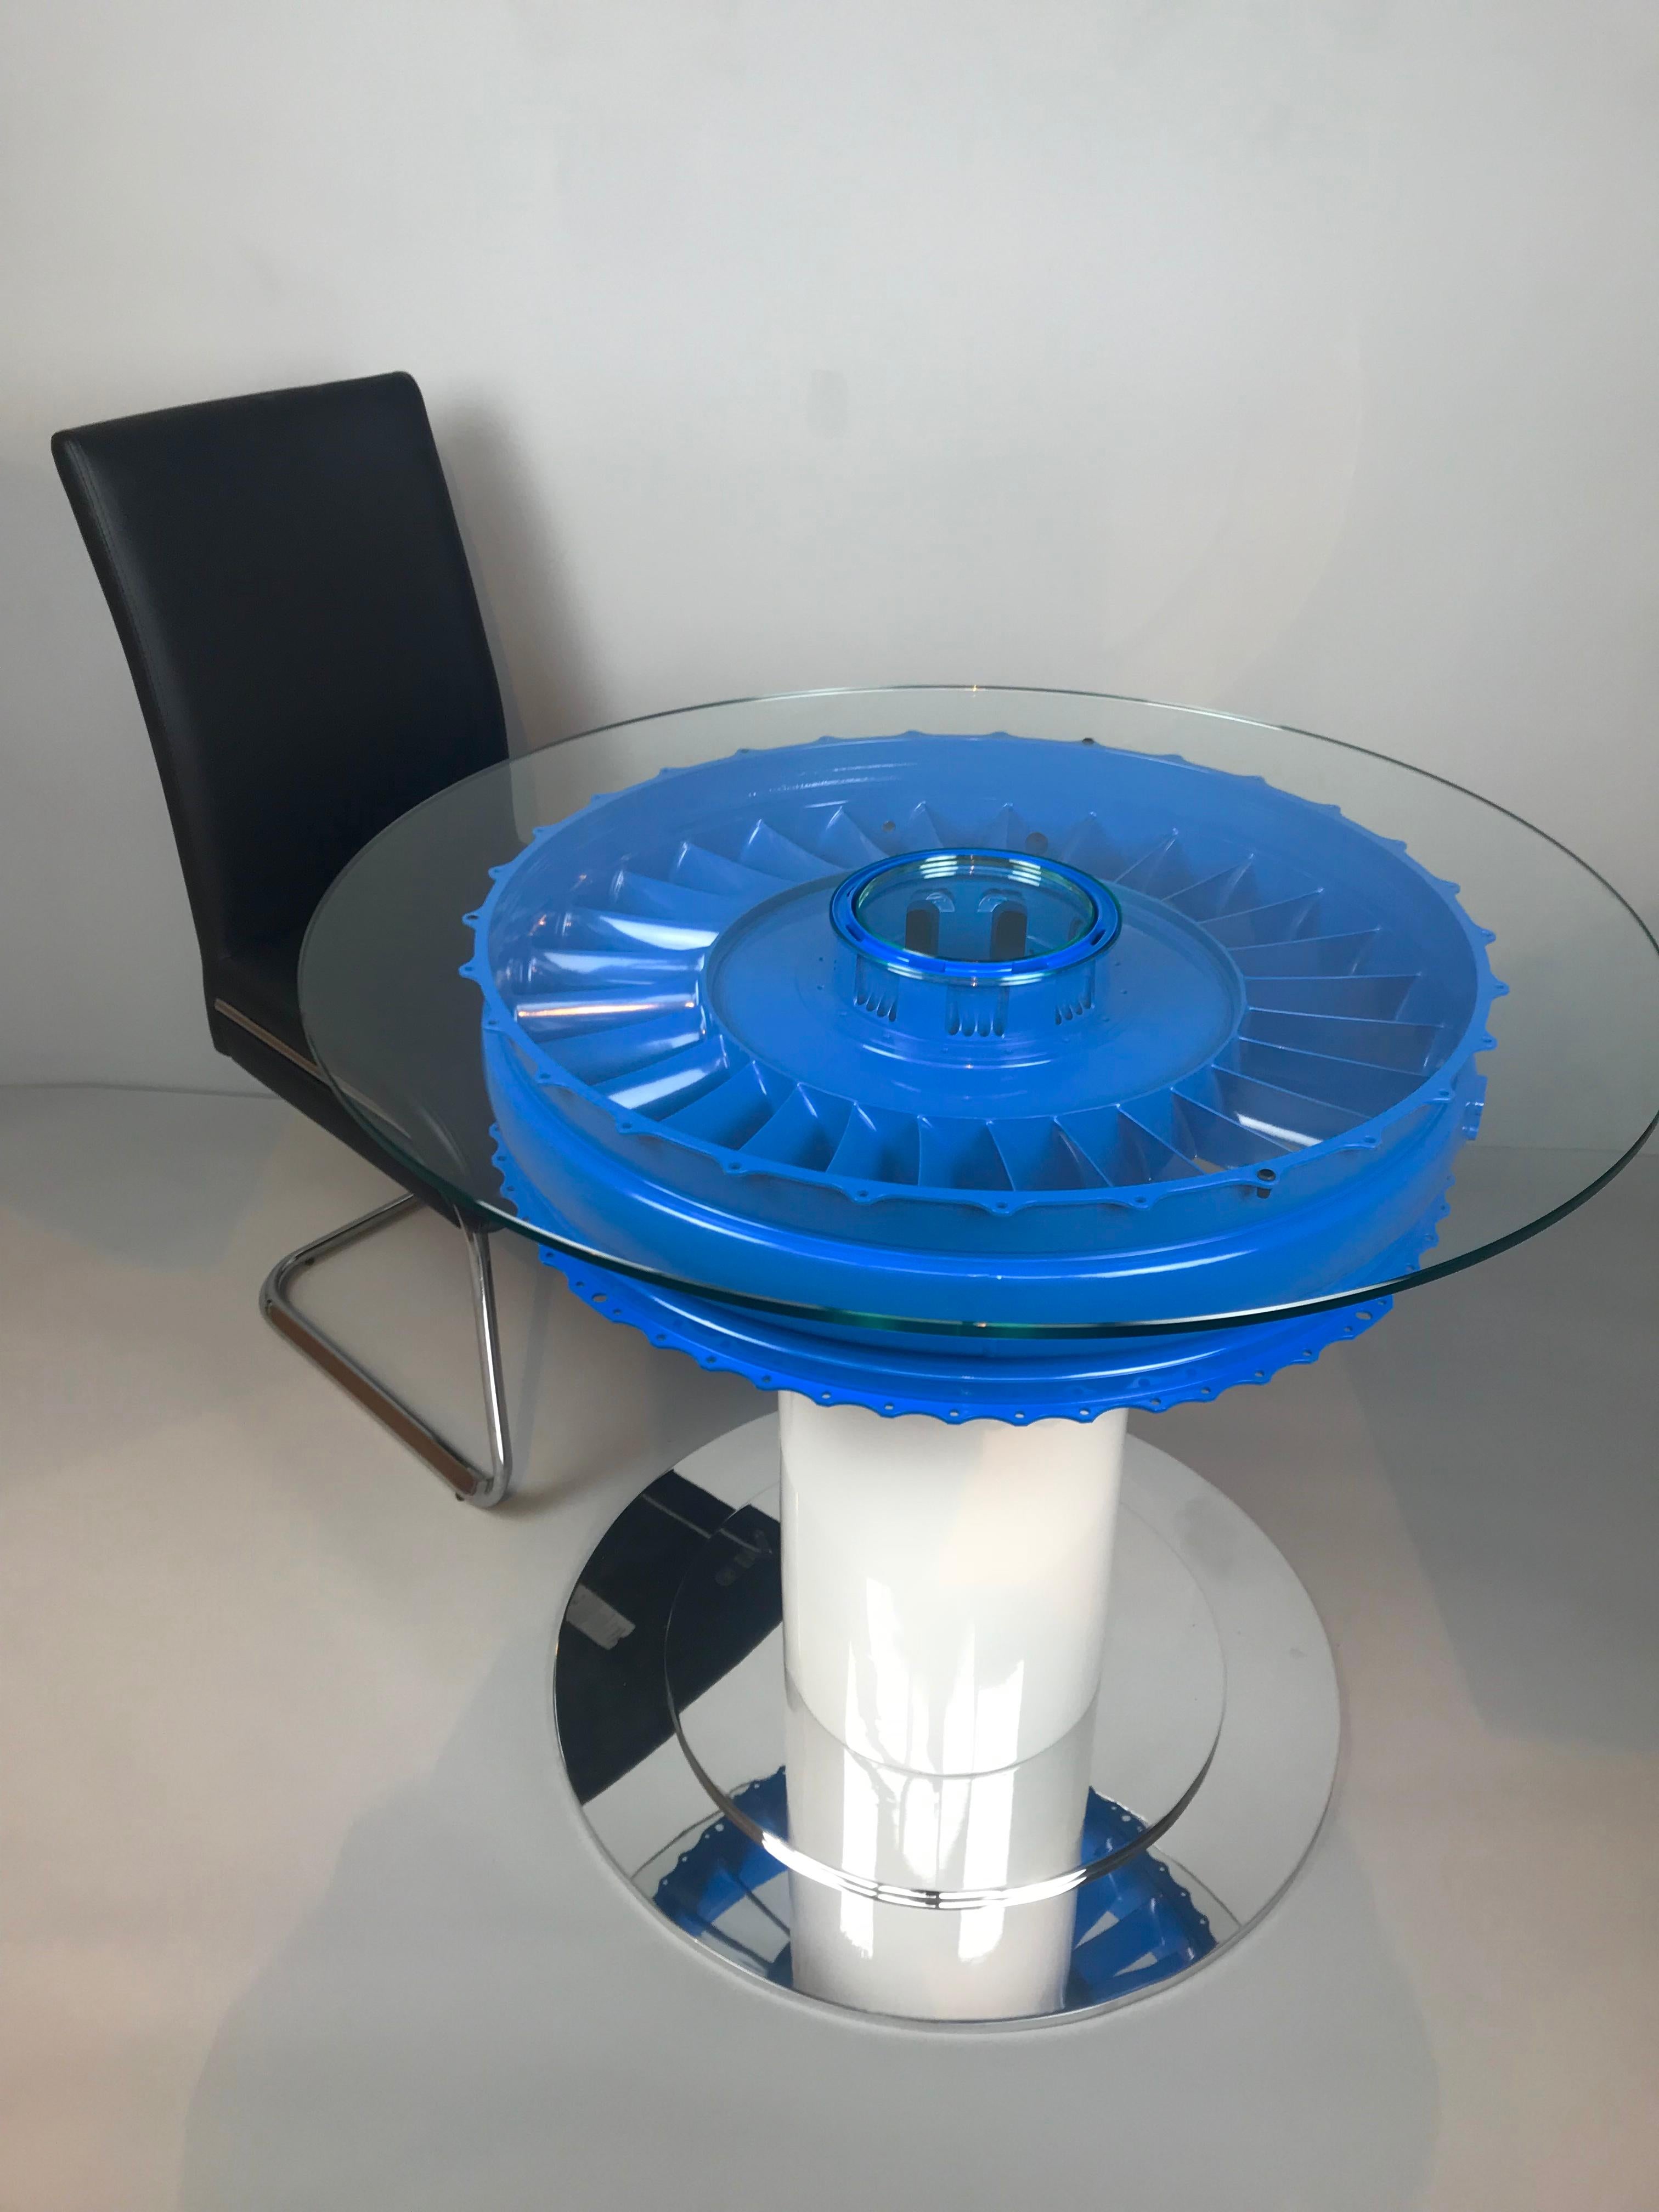 Intrepid design offers a stage 3 LP Stator section to create your 2-3 seater combat jet dining table. Practical and unique which a variety of options The white base, as shown on the website can be finished to any colour of your choice. 

The